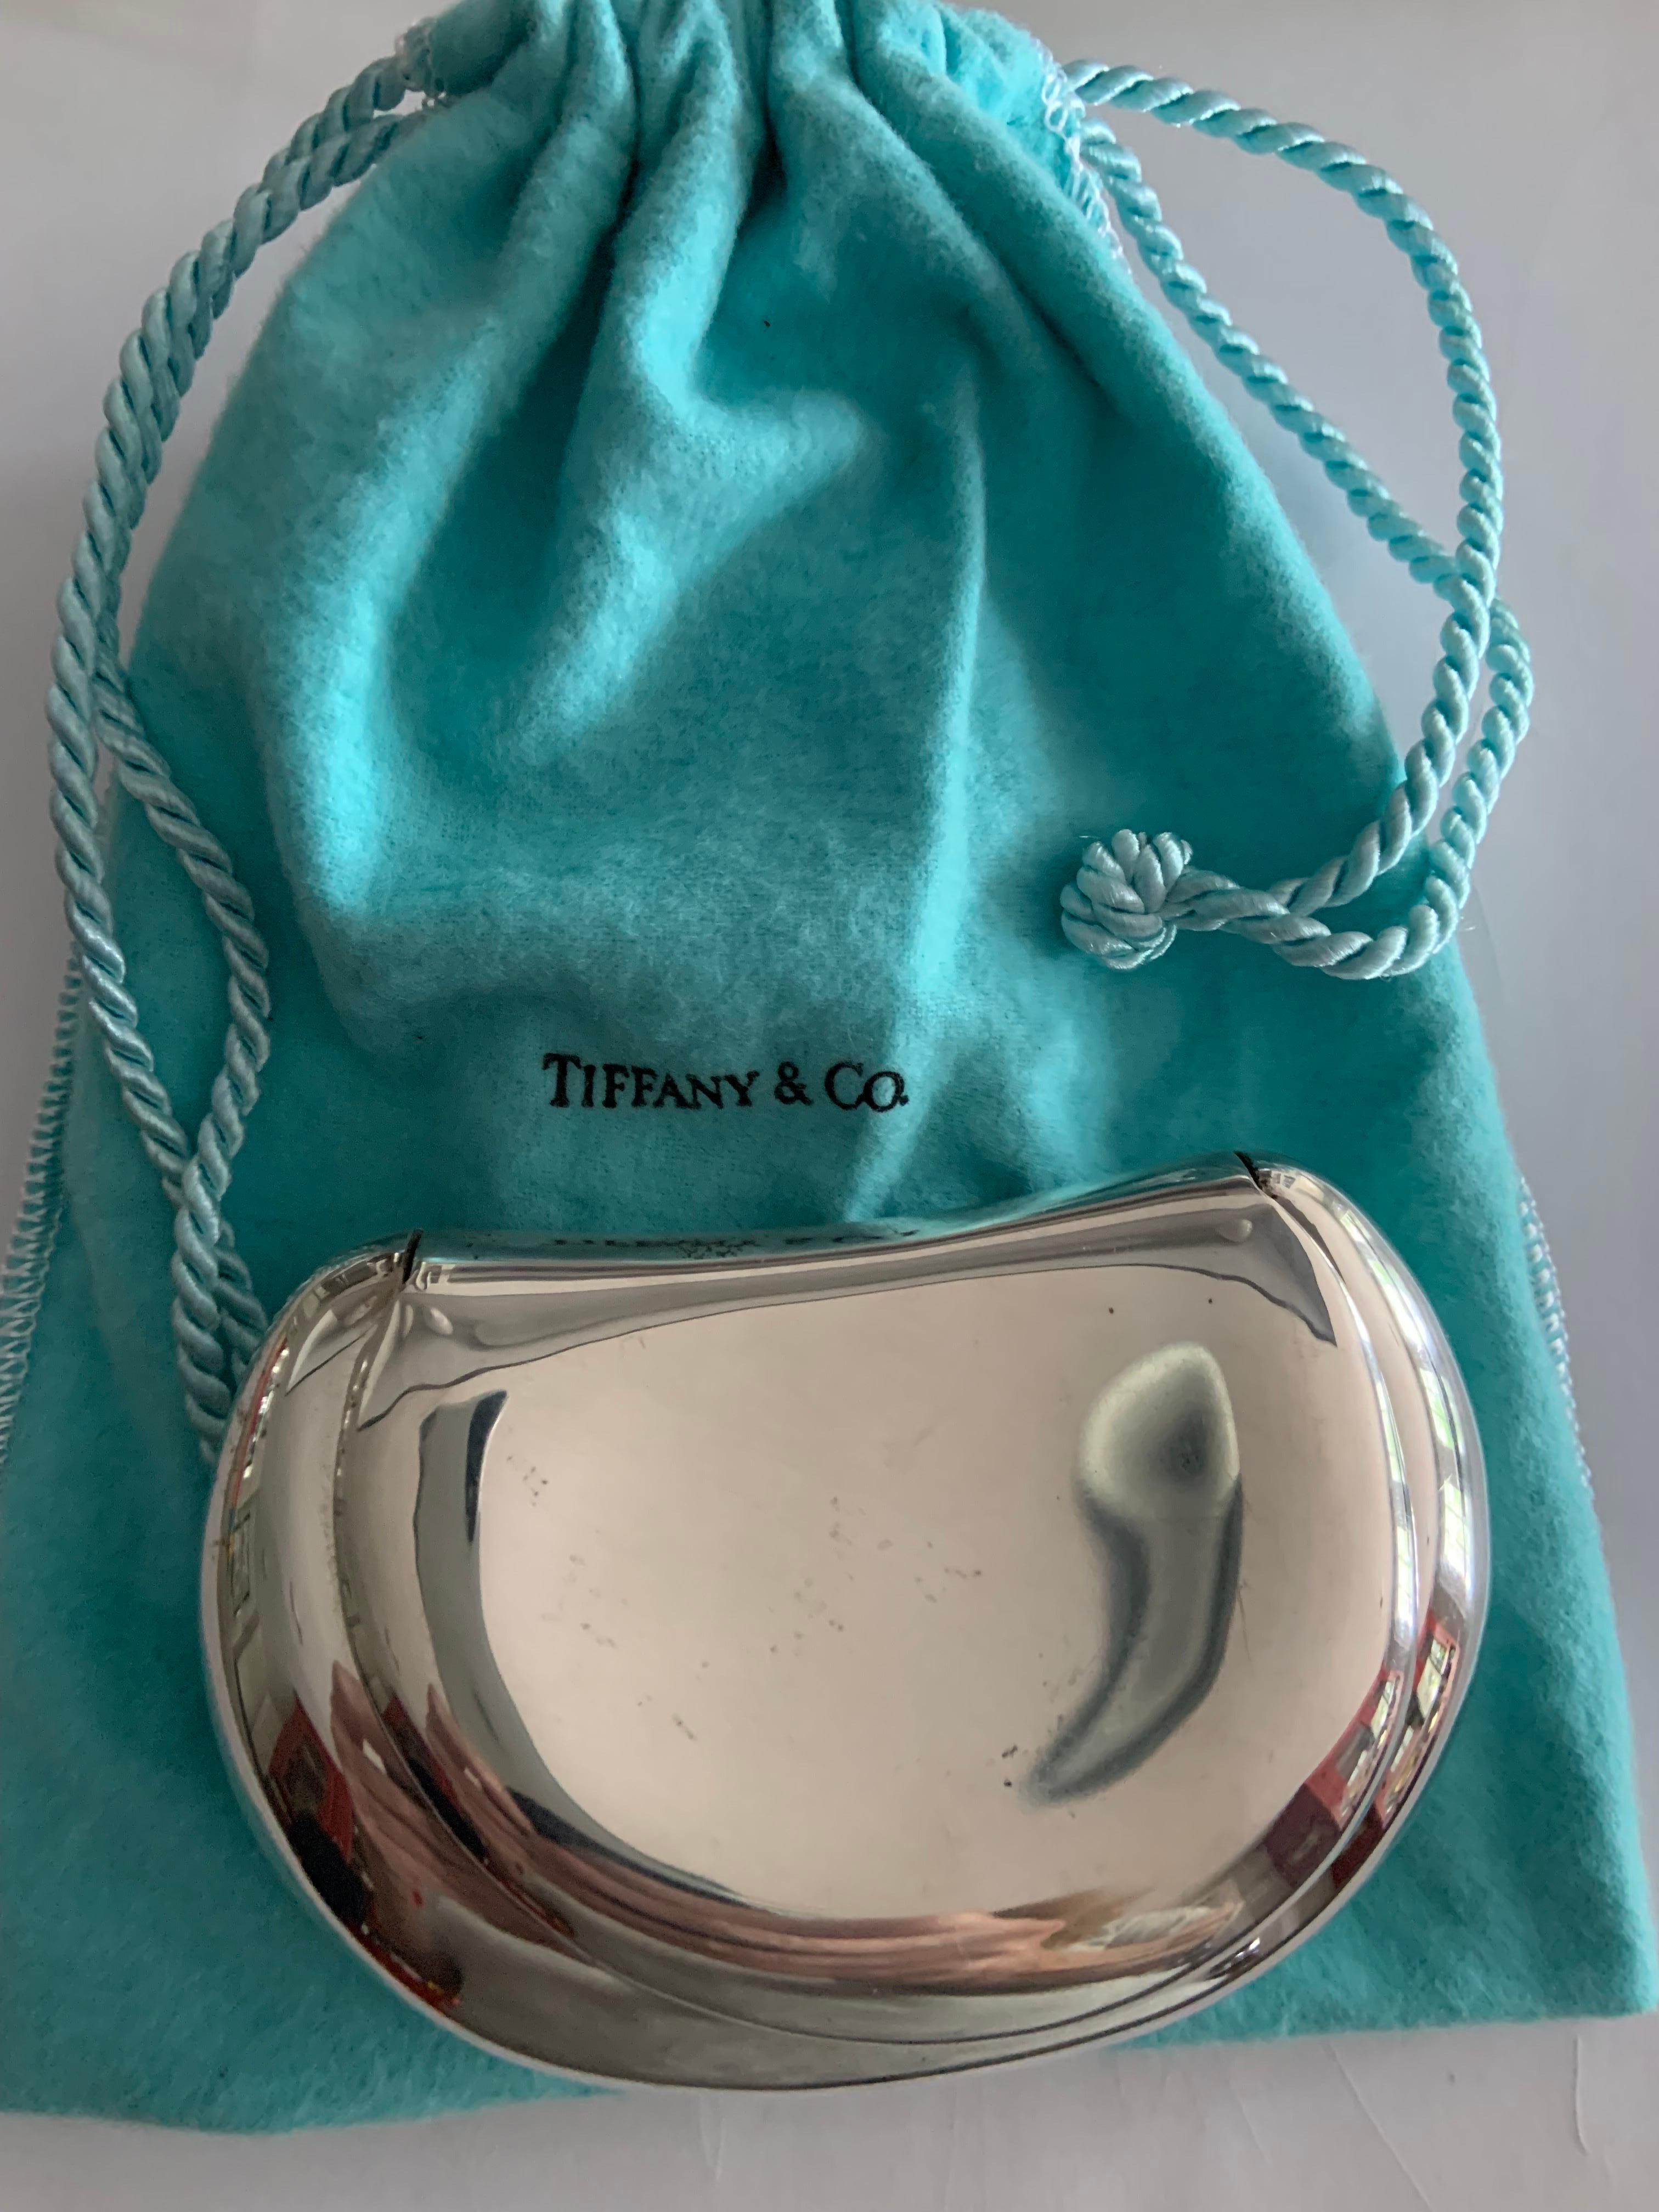 An early design from Elsa Peretti for Tiffany & Co, this stunning sterling silver clutch is so organic, it fits perfectly in the palm of your hand.  The bag is smooth and sleek and just large enough for a lipstick, key and credit card.  It is marked